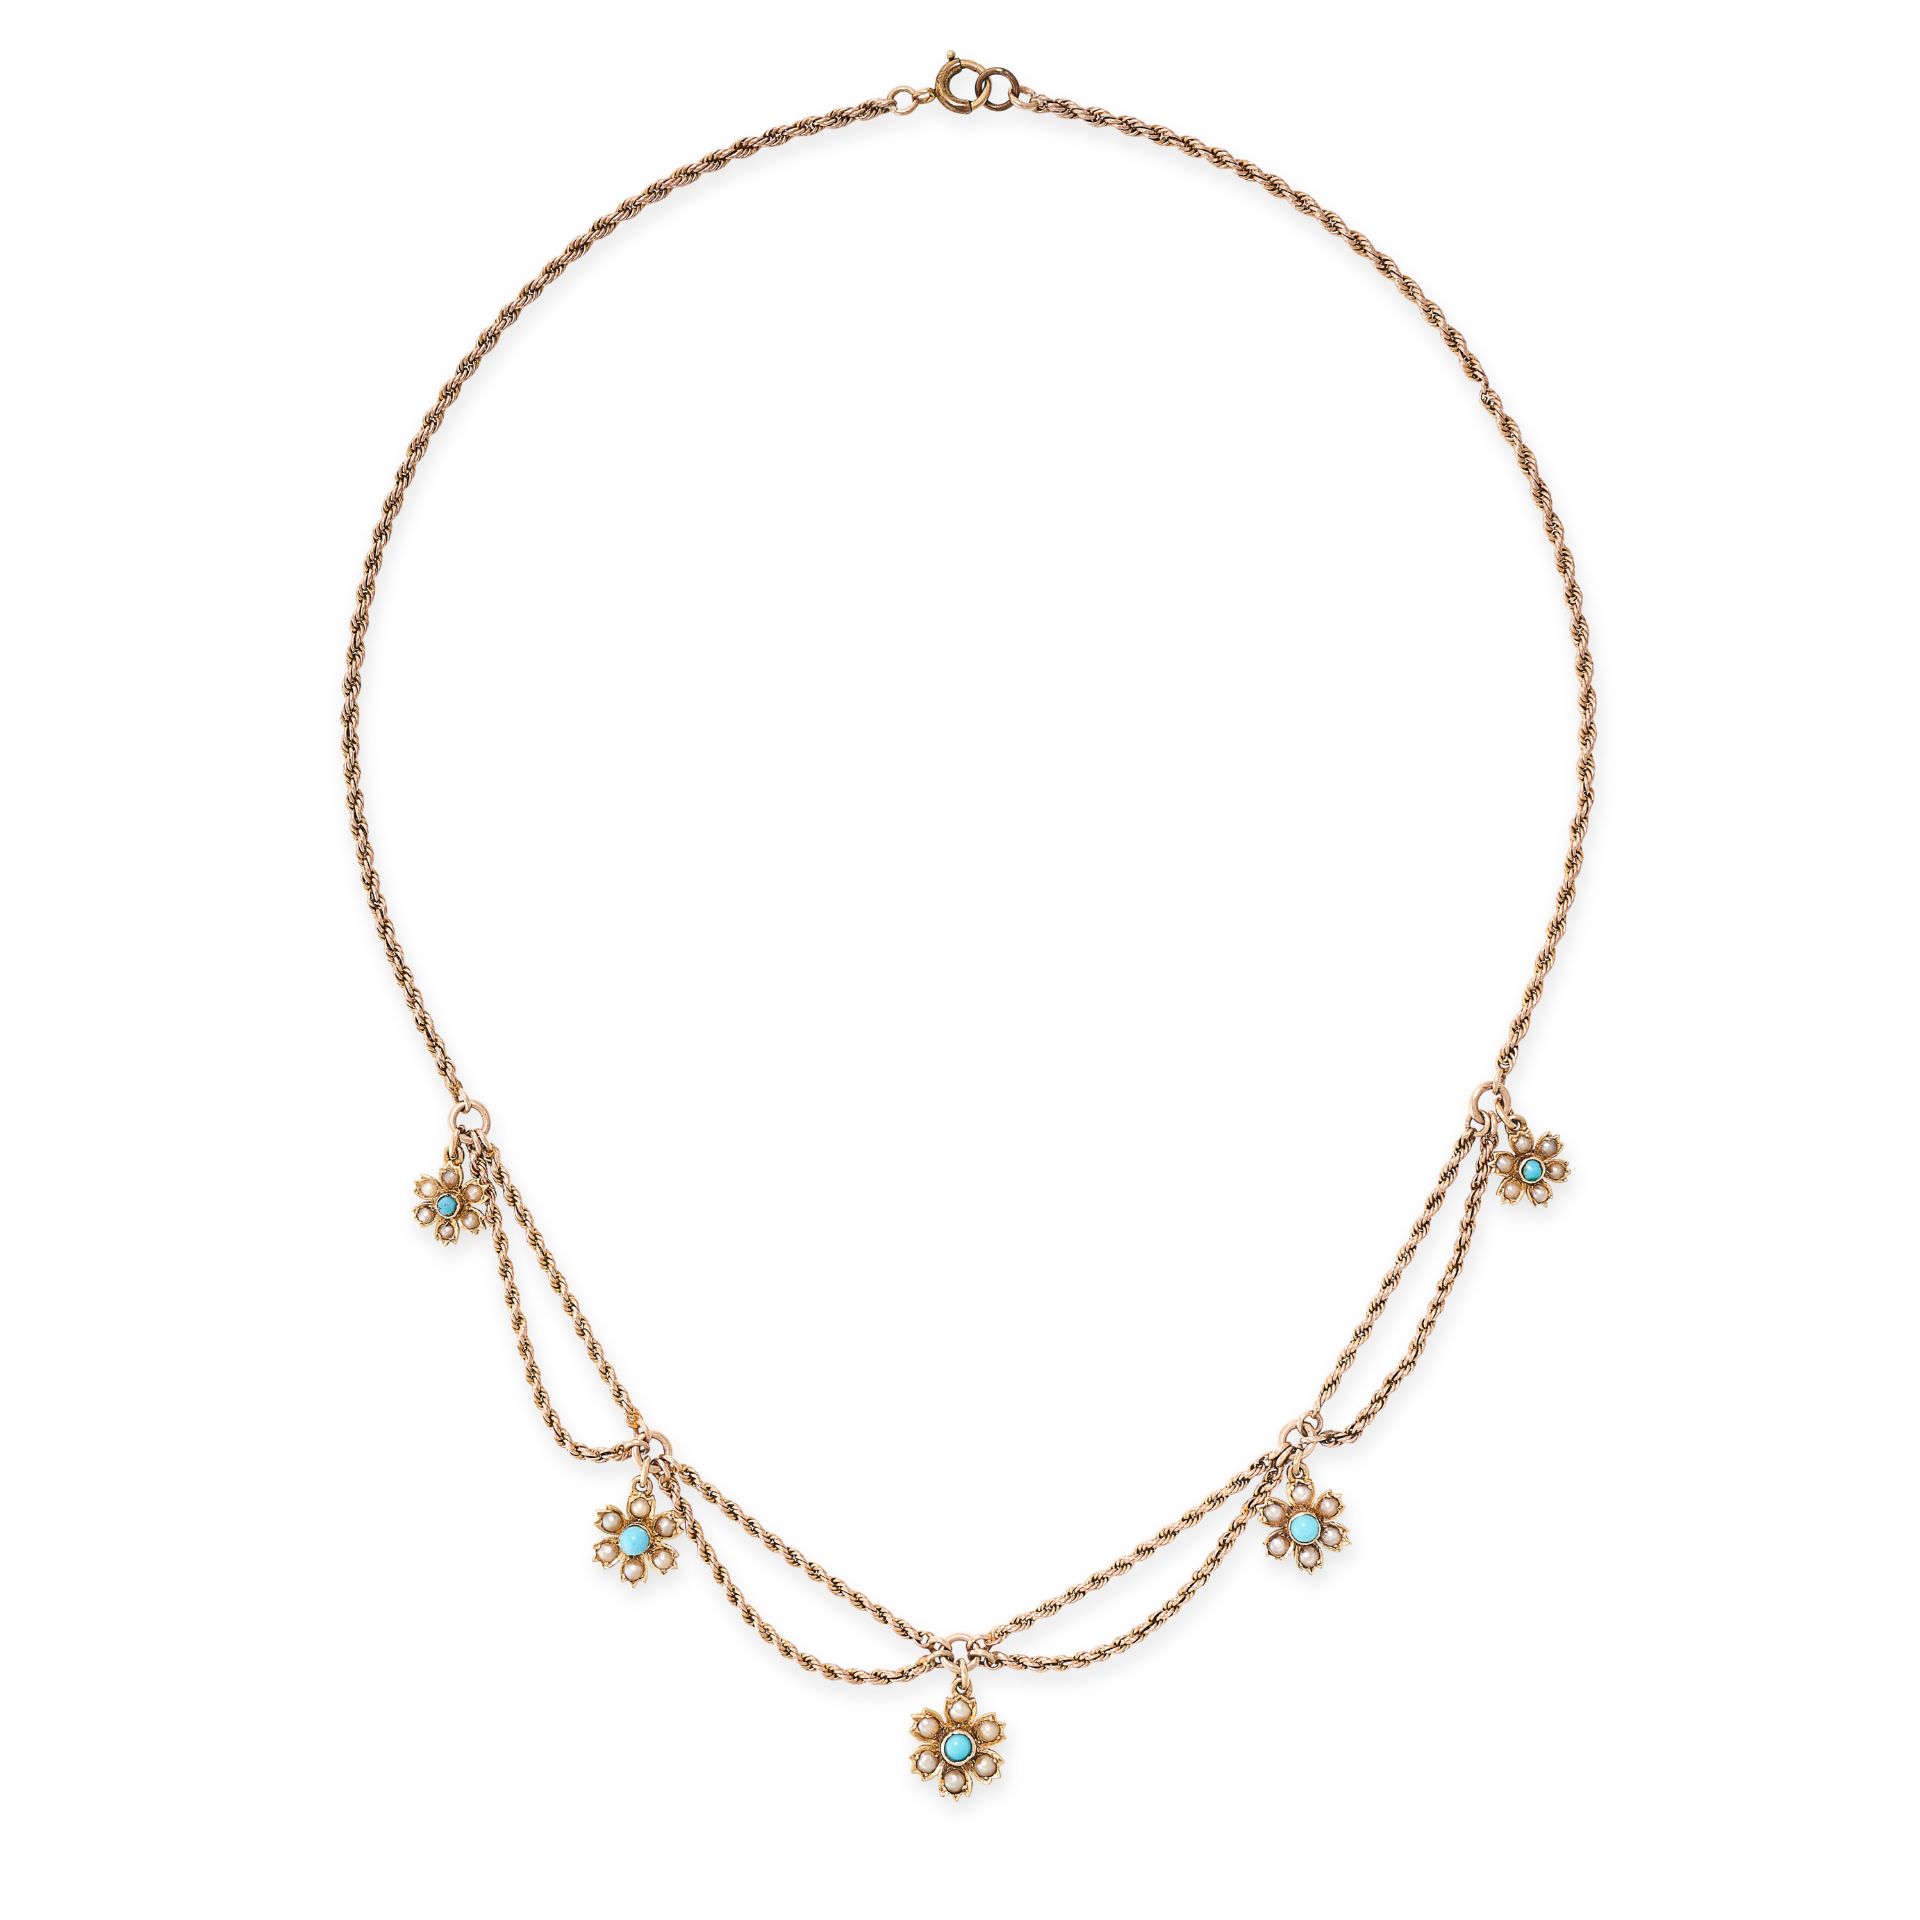 AN ANTIQUE VICTORIAN TURQUOISE AND PEARL NECKLACE, 19TH CENTURY in 15ct yellow gold, suspending five